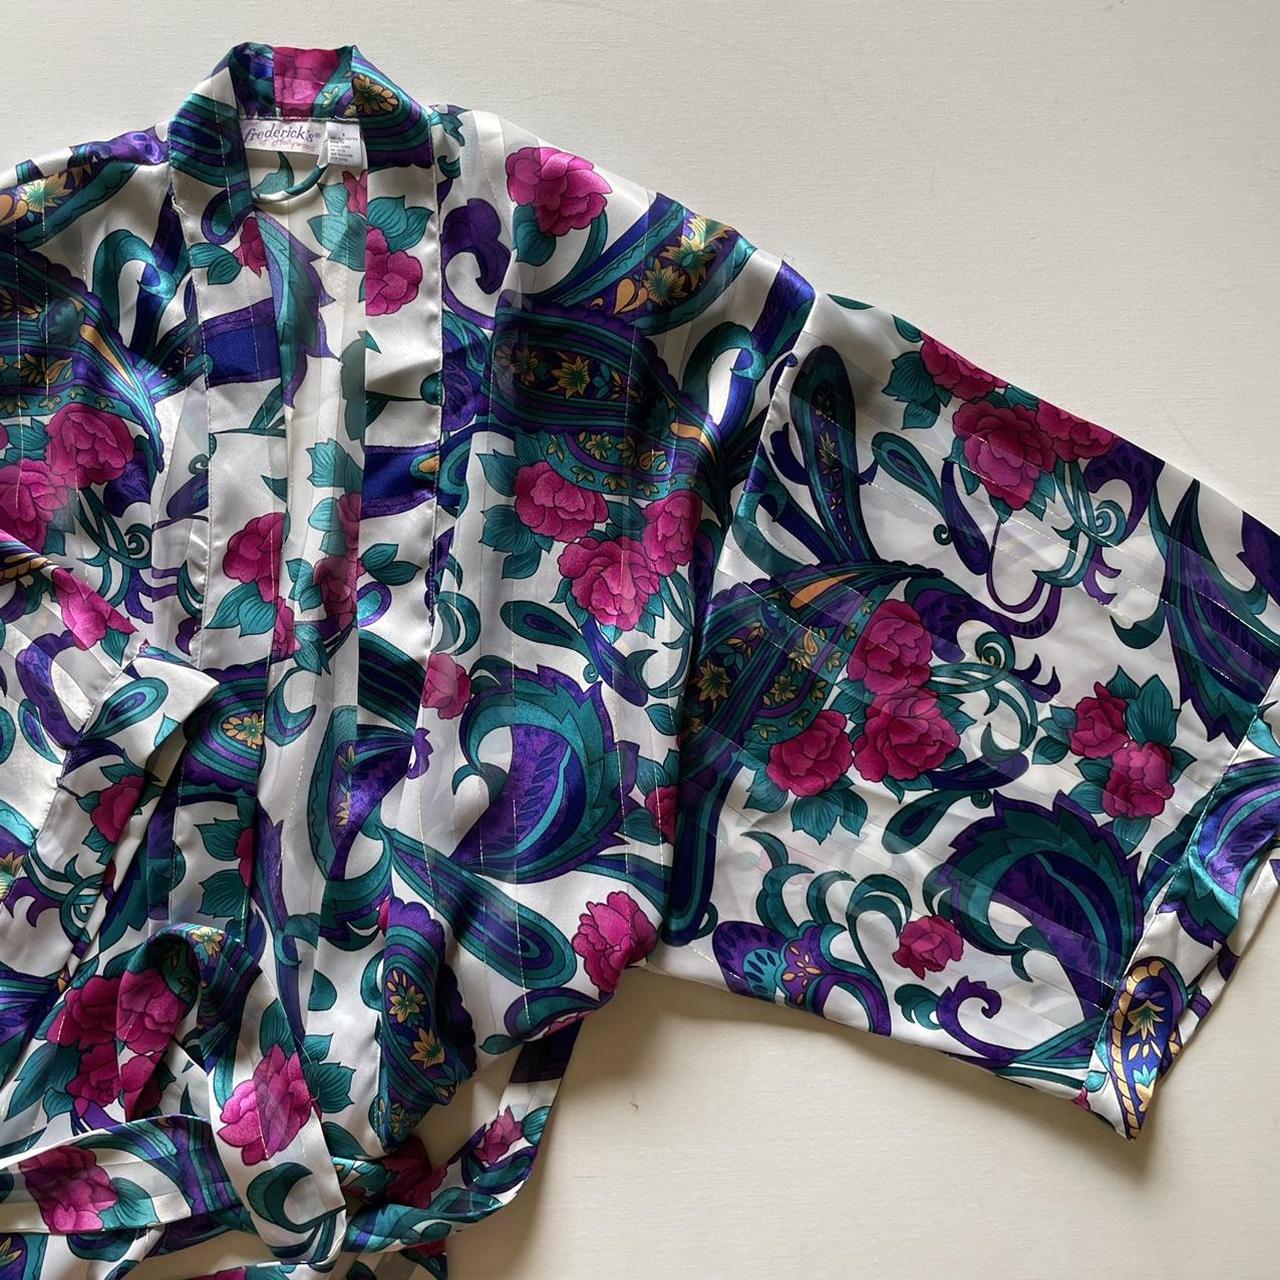 Product Image 3 - 90's Bright Floral Robe (S)

Gorgeous